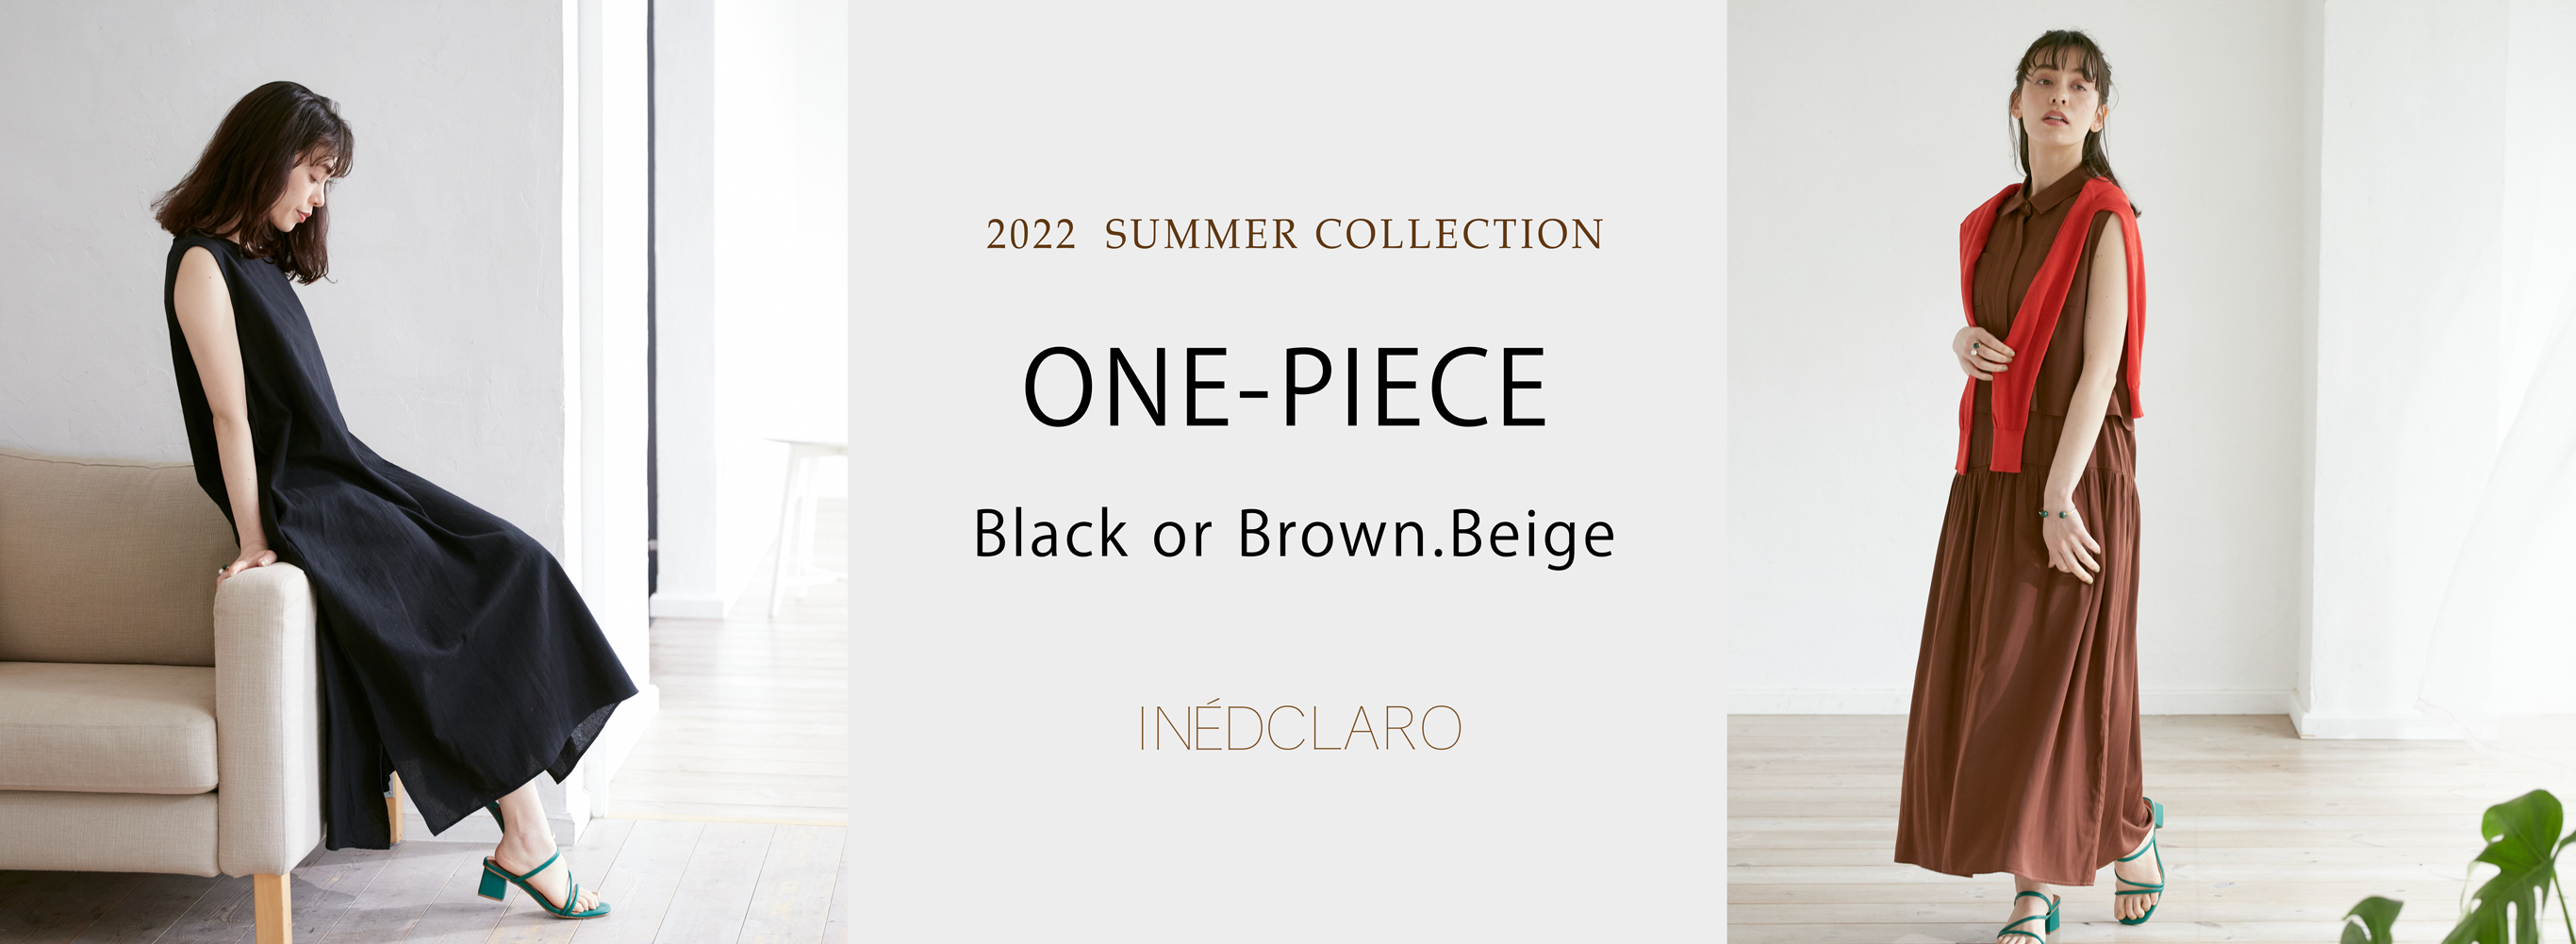 2022 SUMMER COLLECTION ONE-PIECE